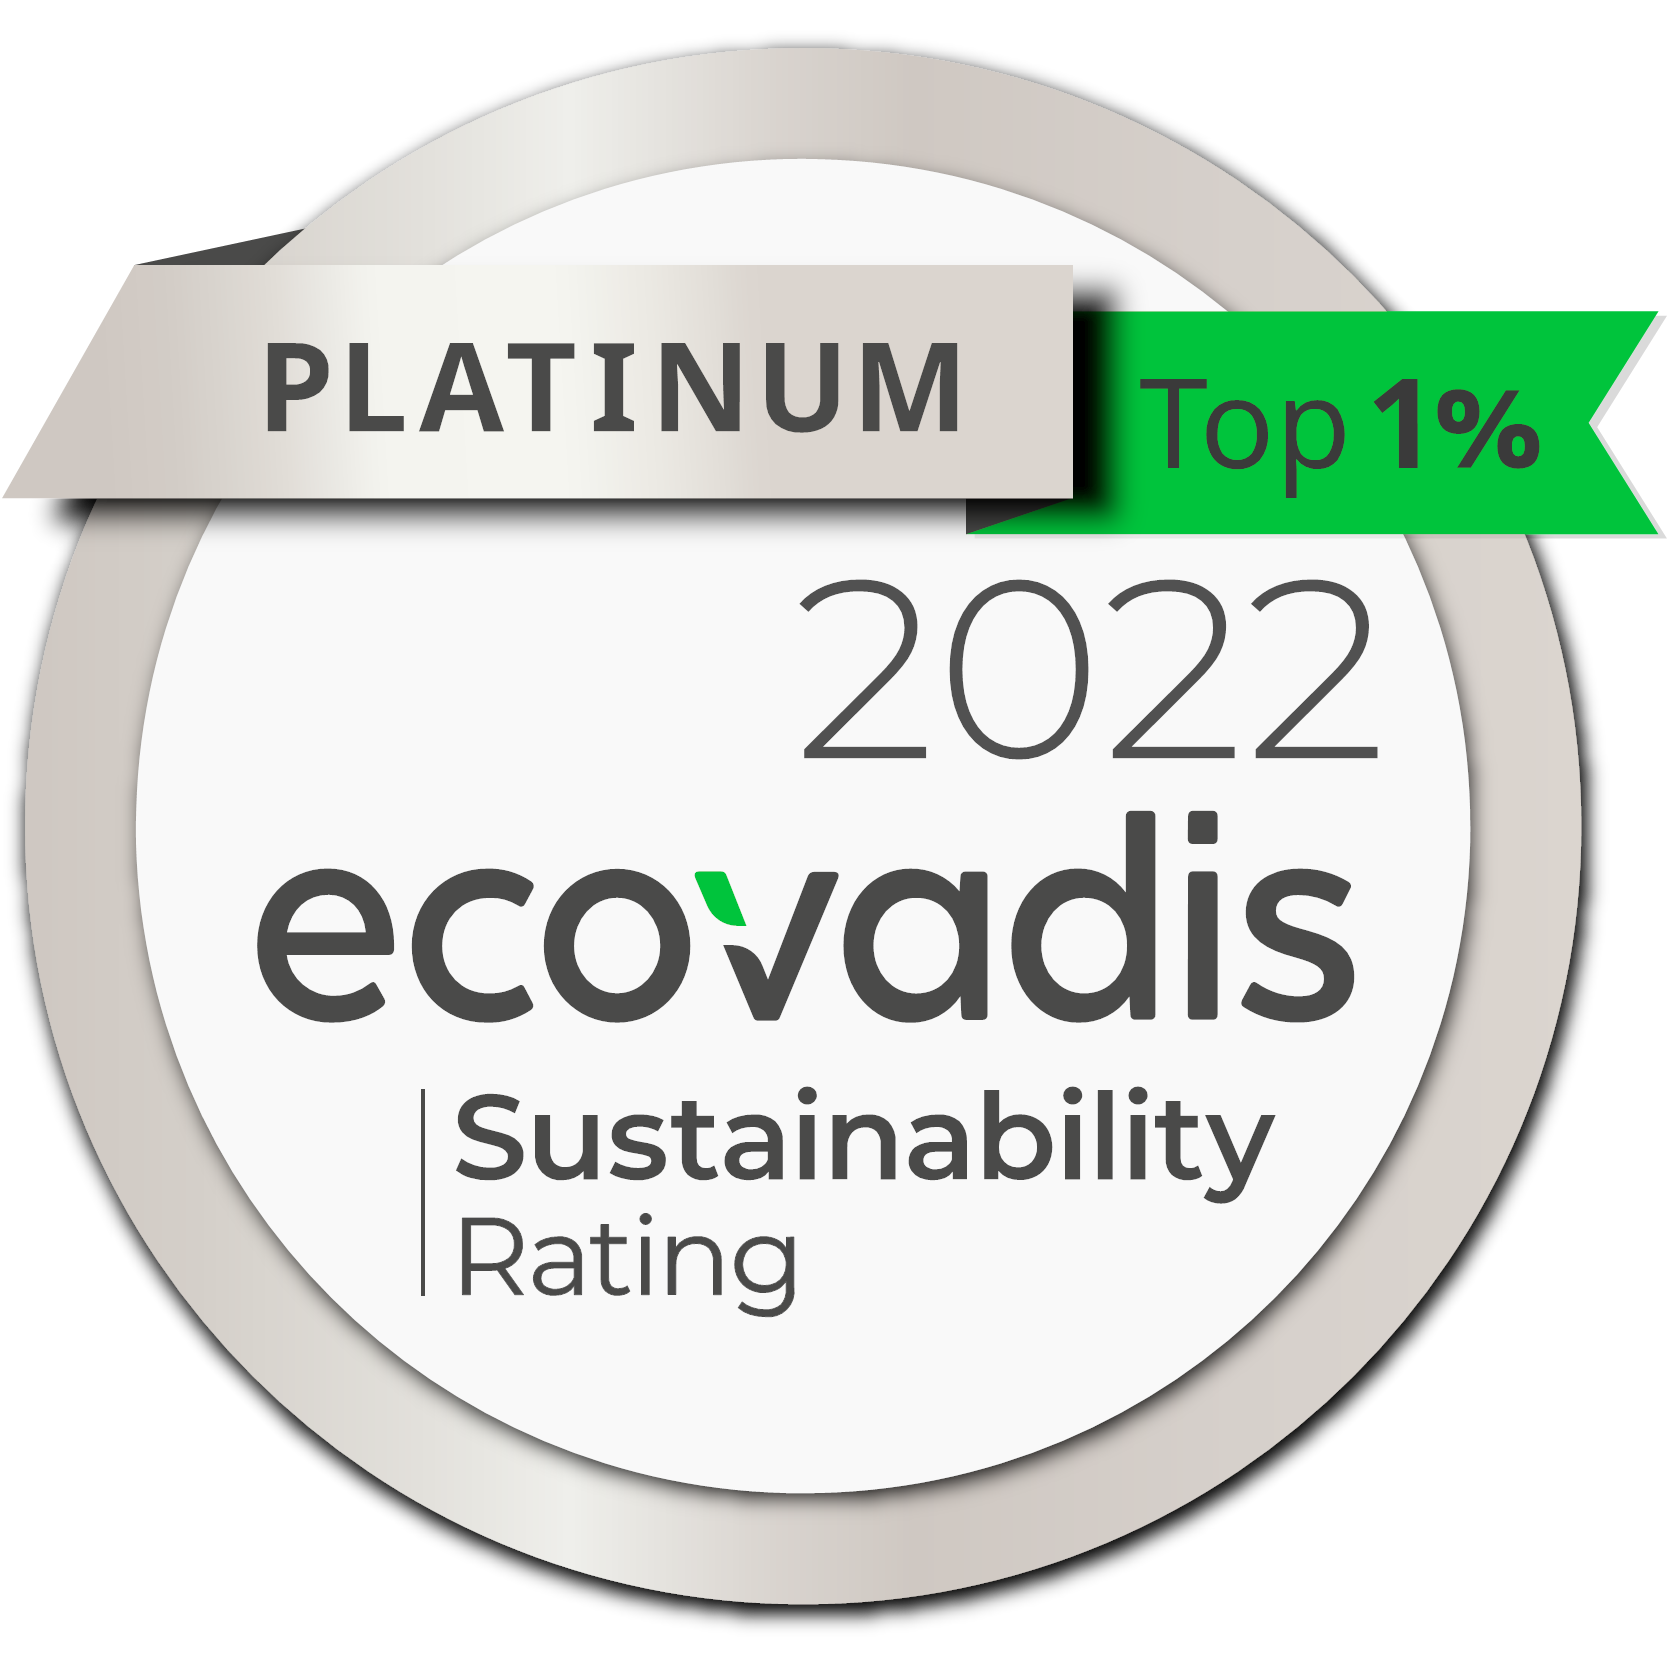 Our Corporate Social Responsibility Rating